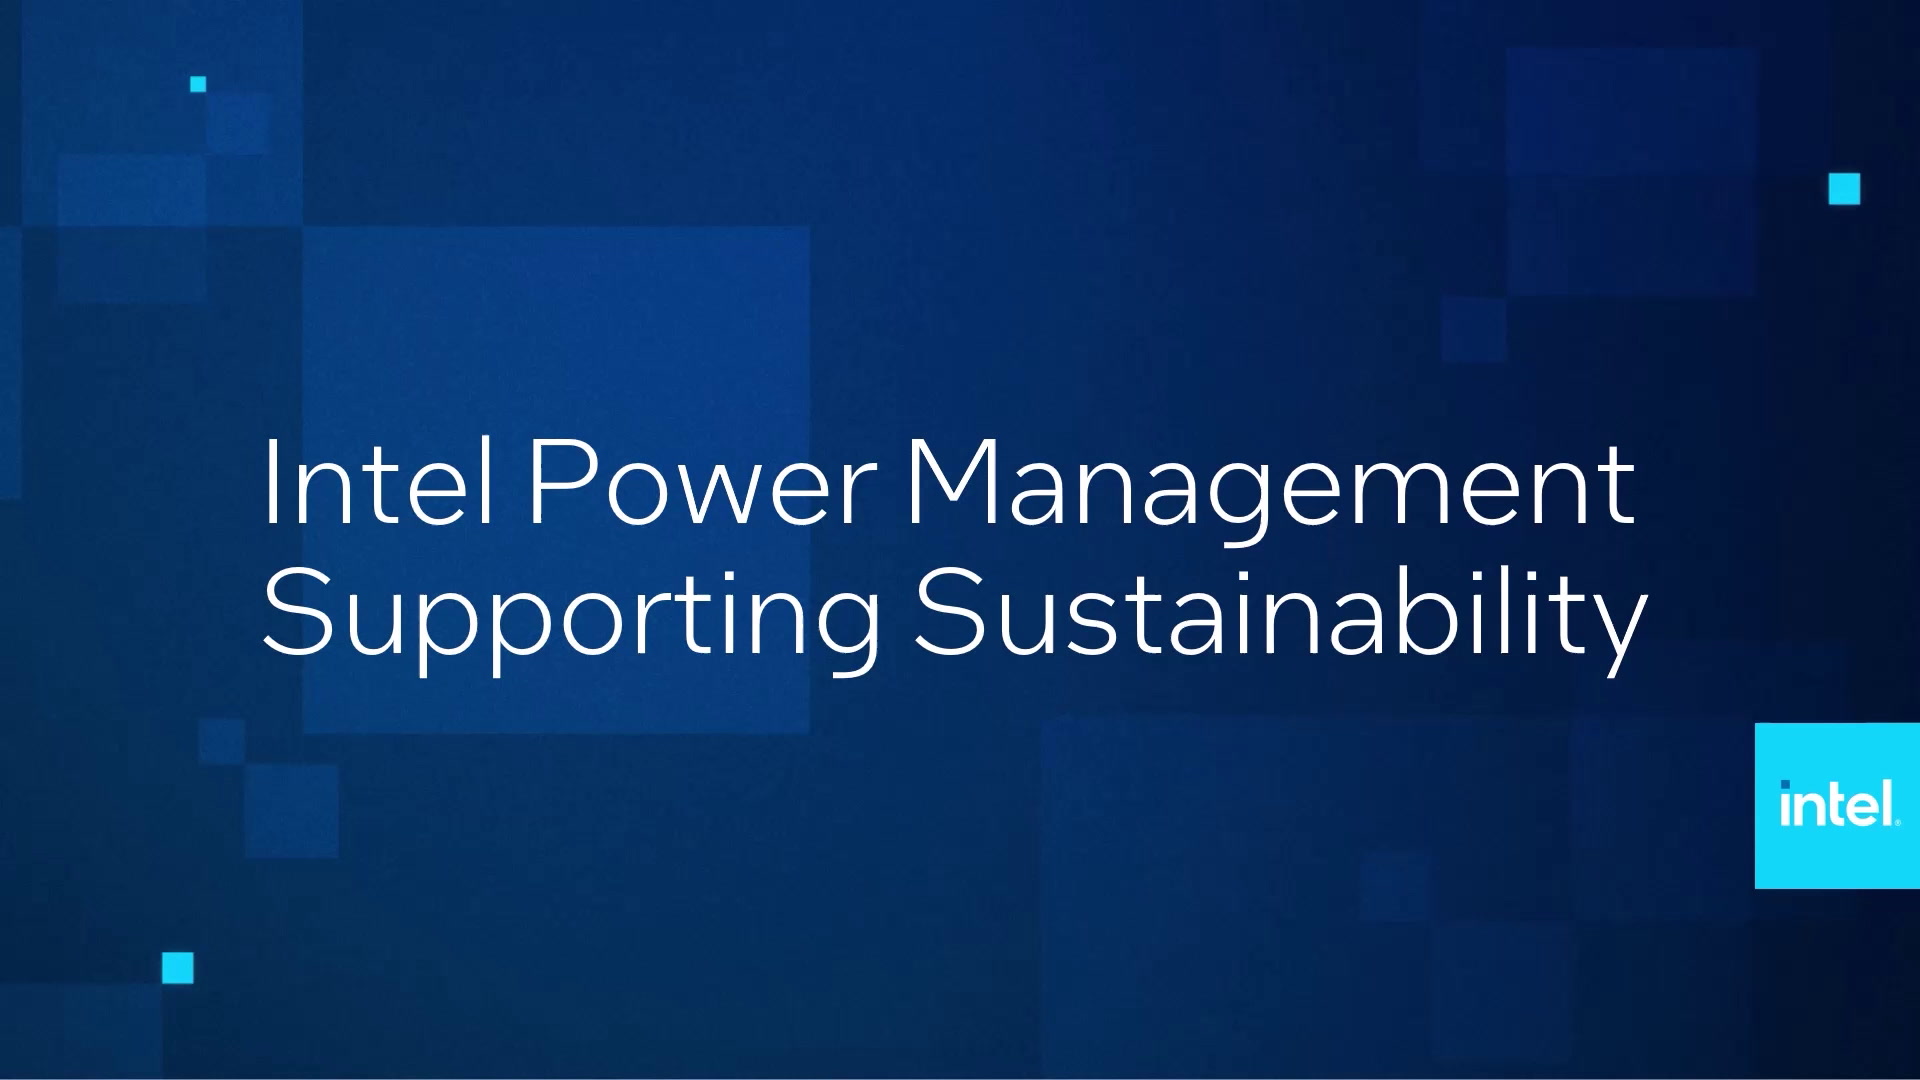 Intel Power Management Supporting Sustainability